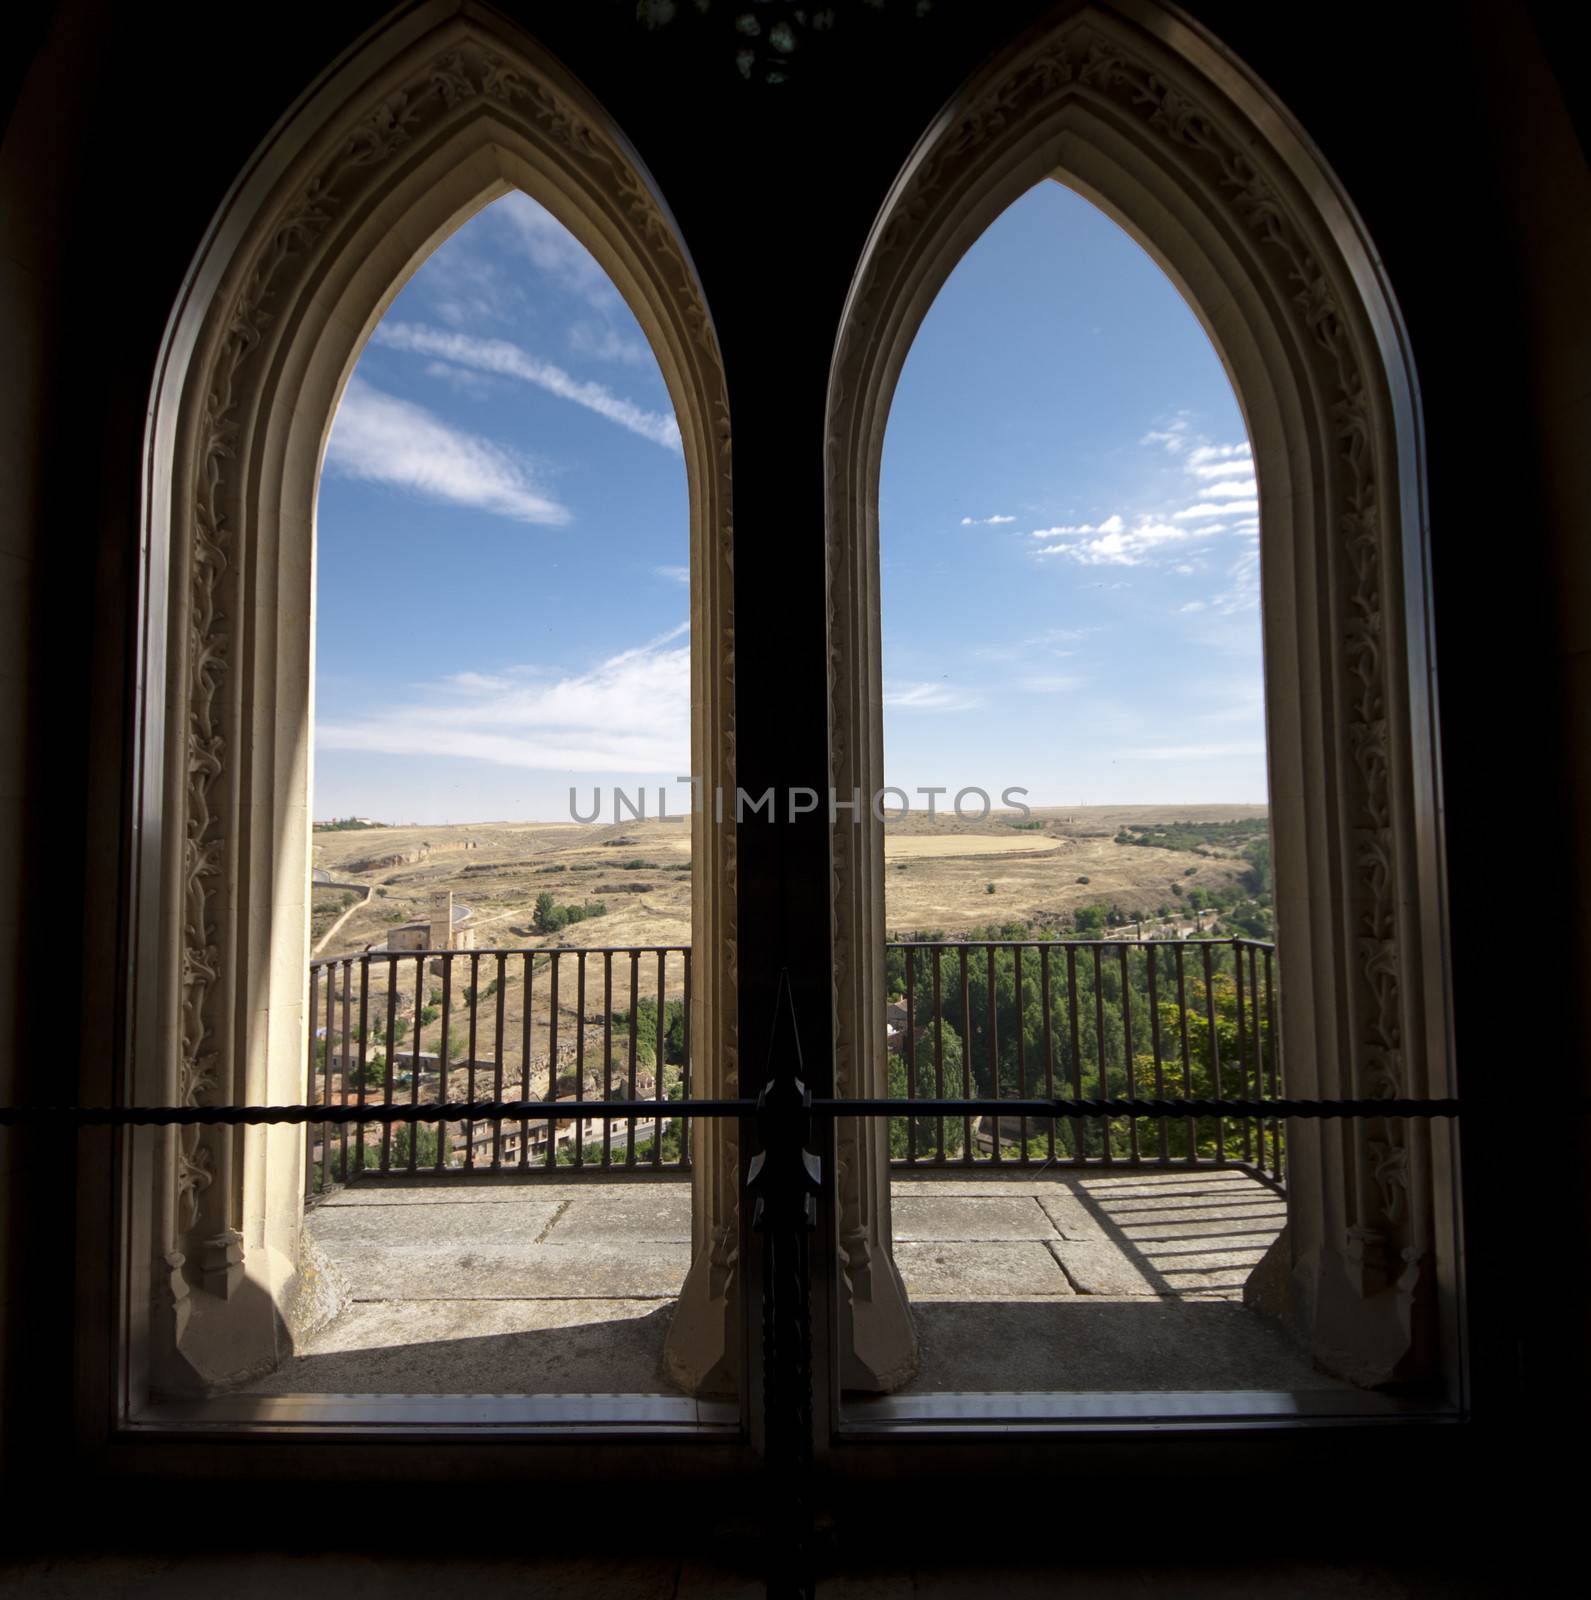 View from the window from inside the castle of Segovia